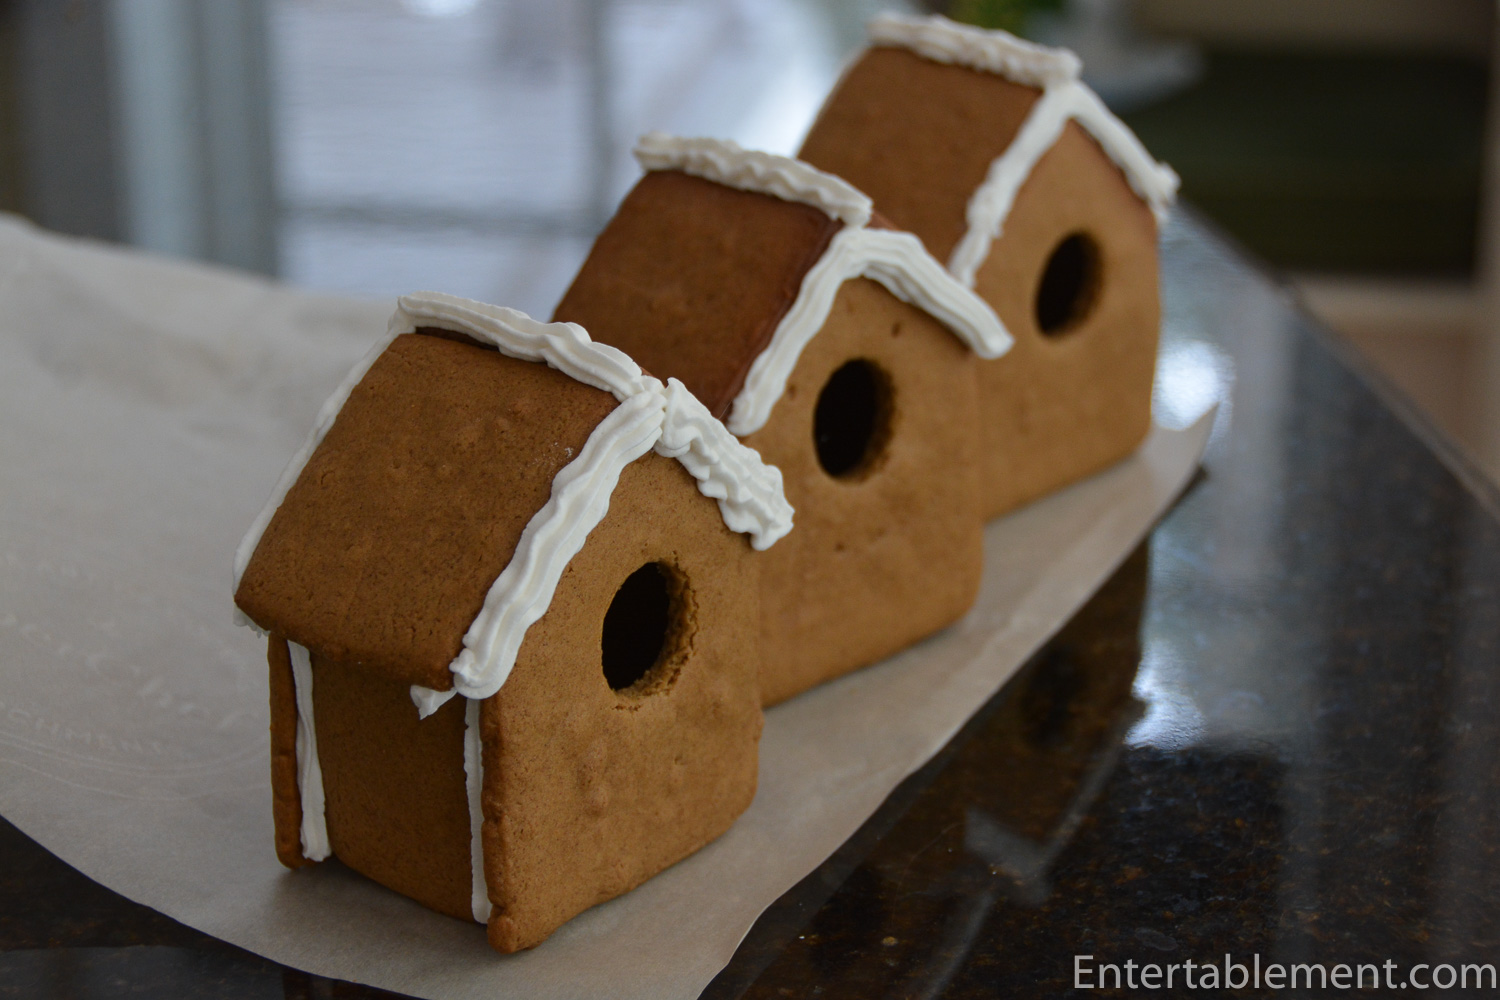 The BEST Ways to Use Tiny Gingerbread Houses! - Feet Under My Table